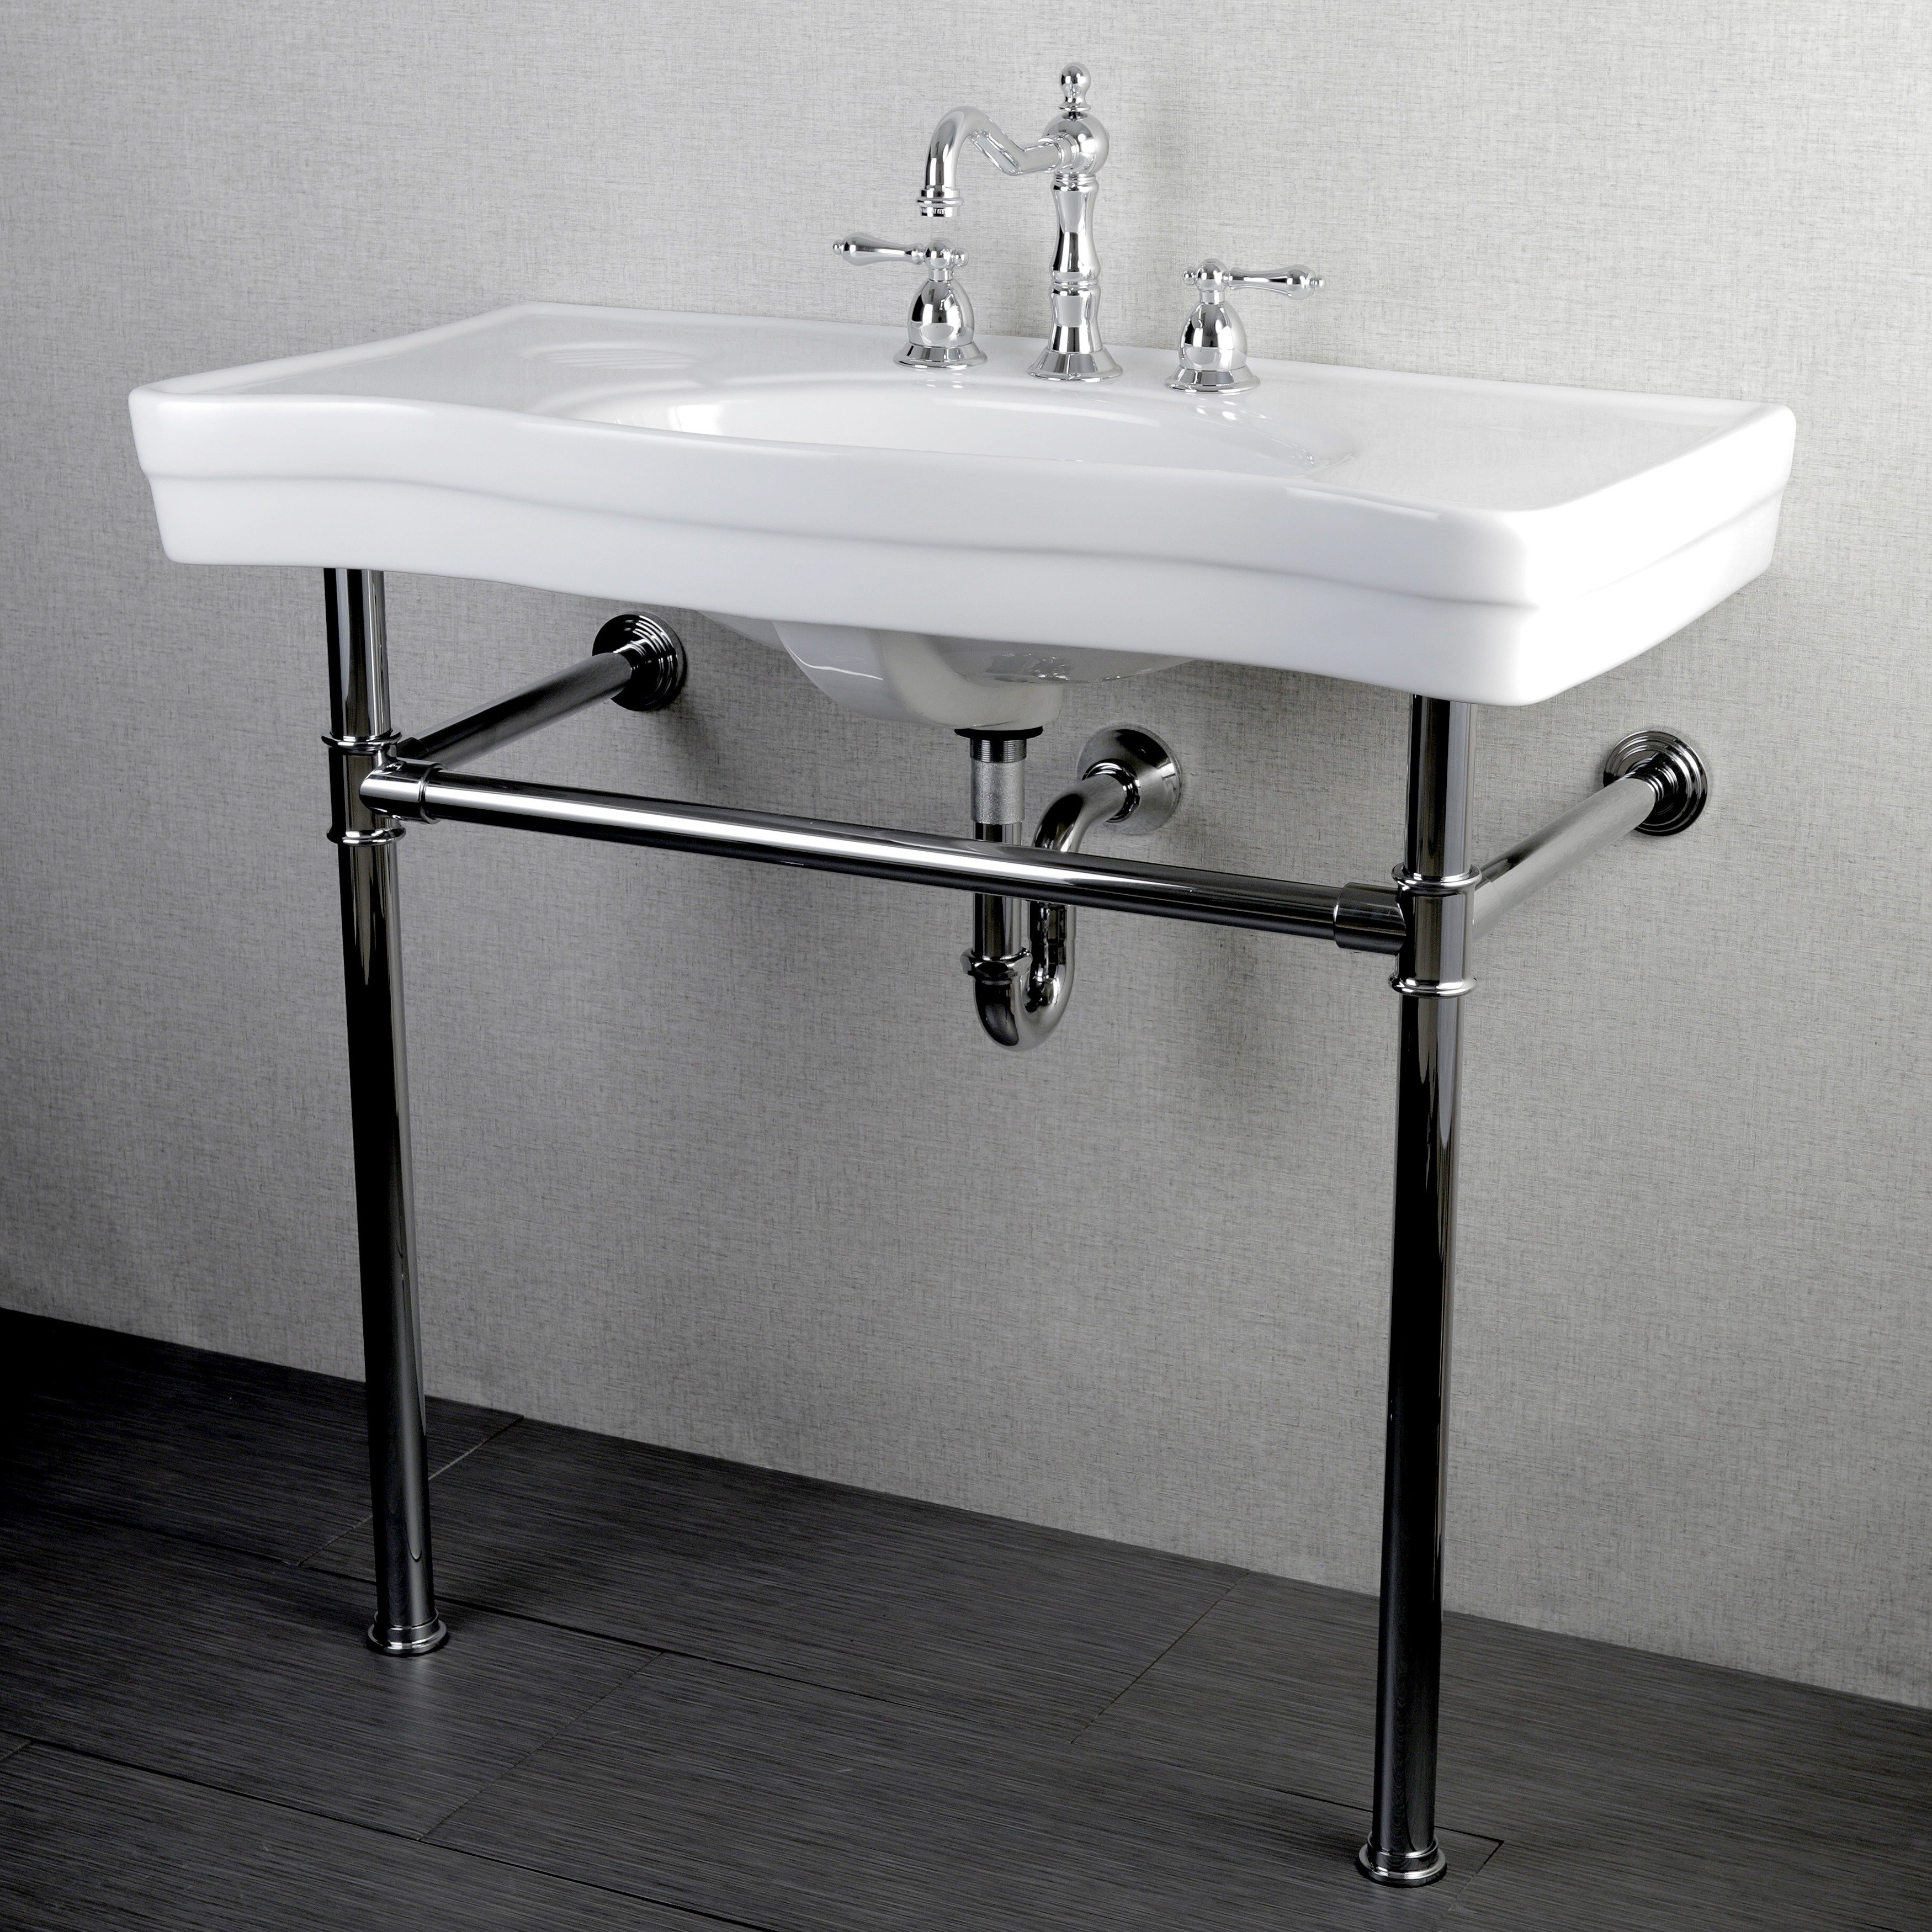 Imperial Vintage Chrome Pedestal Vitreous China Sink 36-inch Wall-mount  Bathroom Vanity